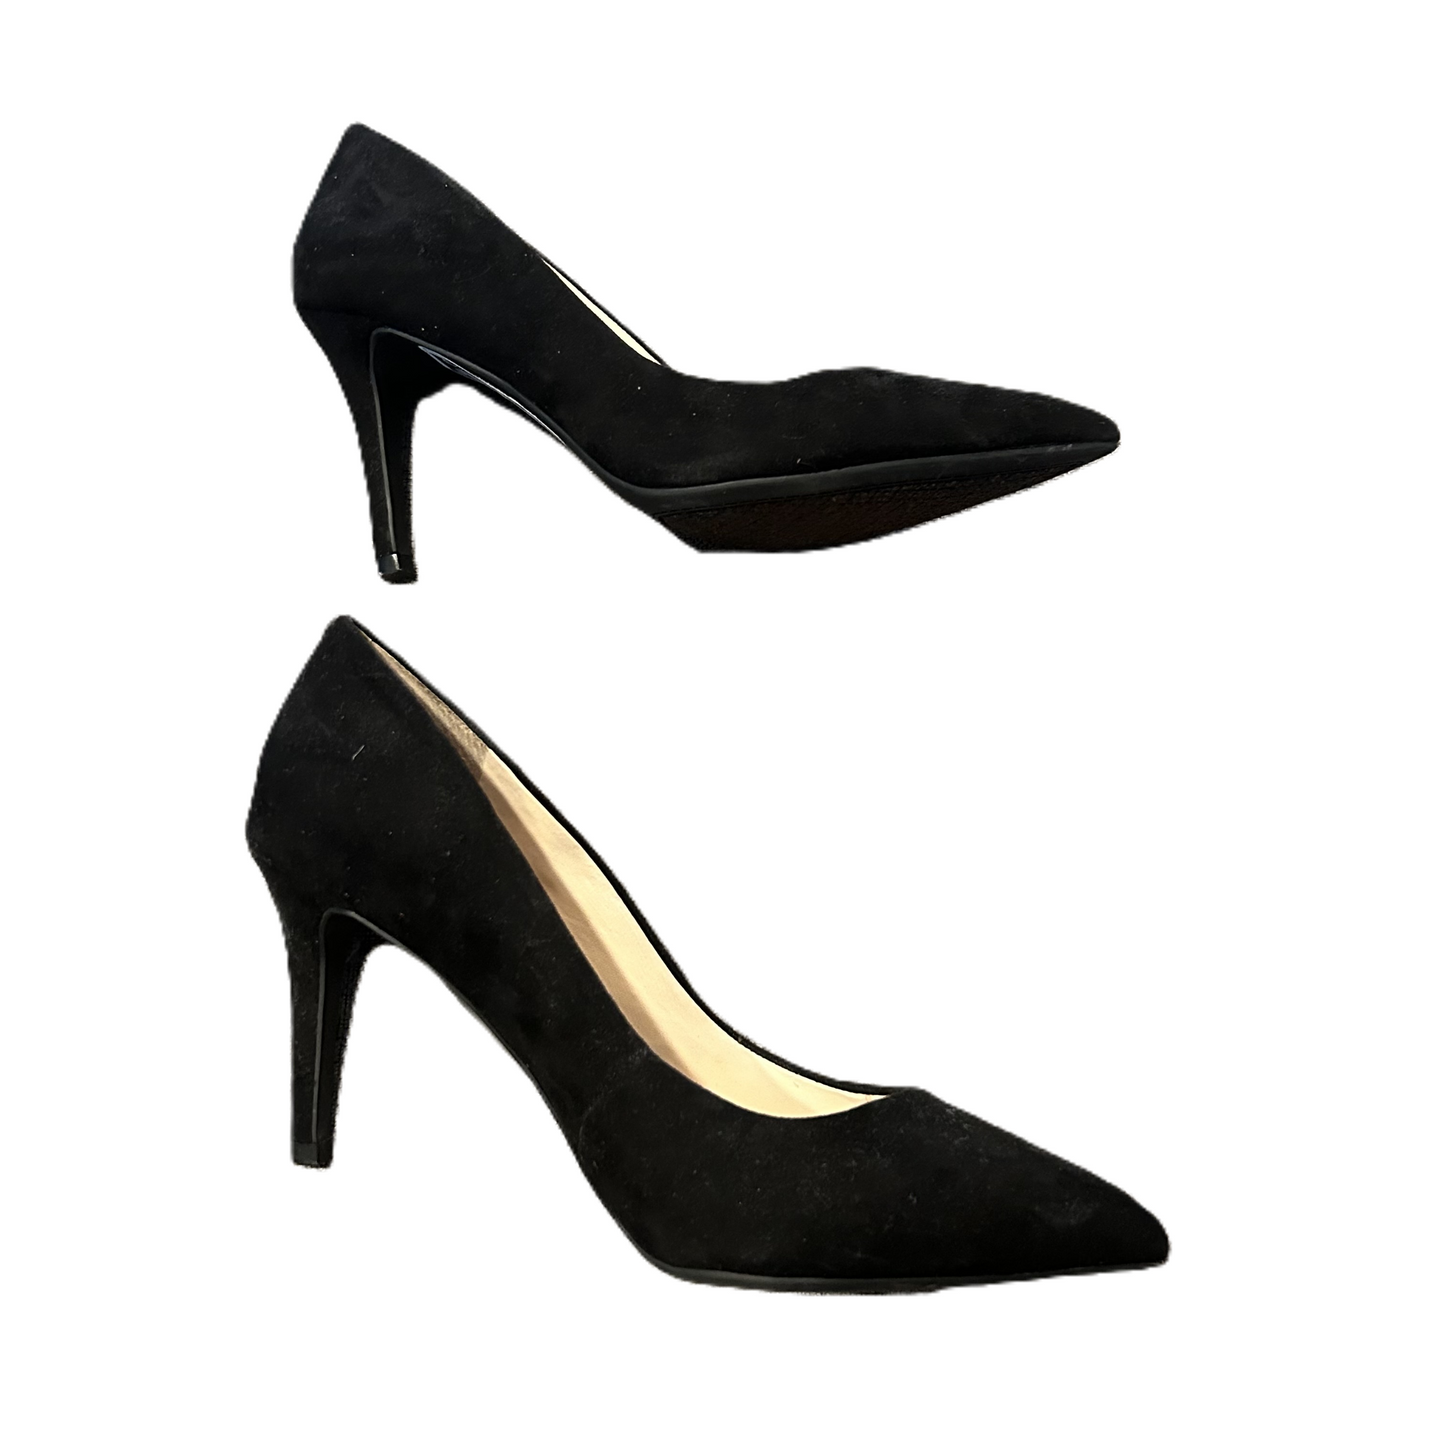 Black Shoes Heels Stiletto By Jessica Simpson, Size: 6.5